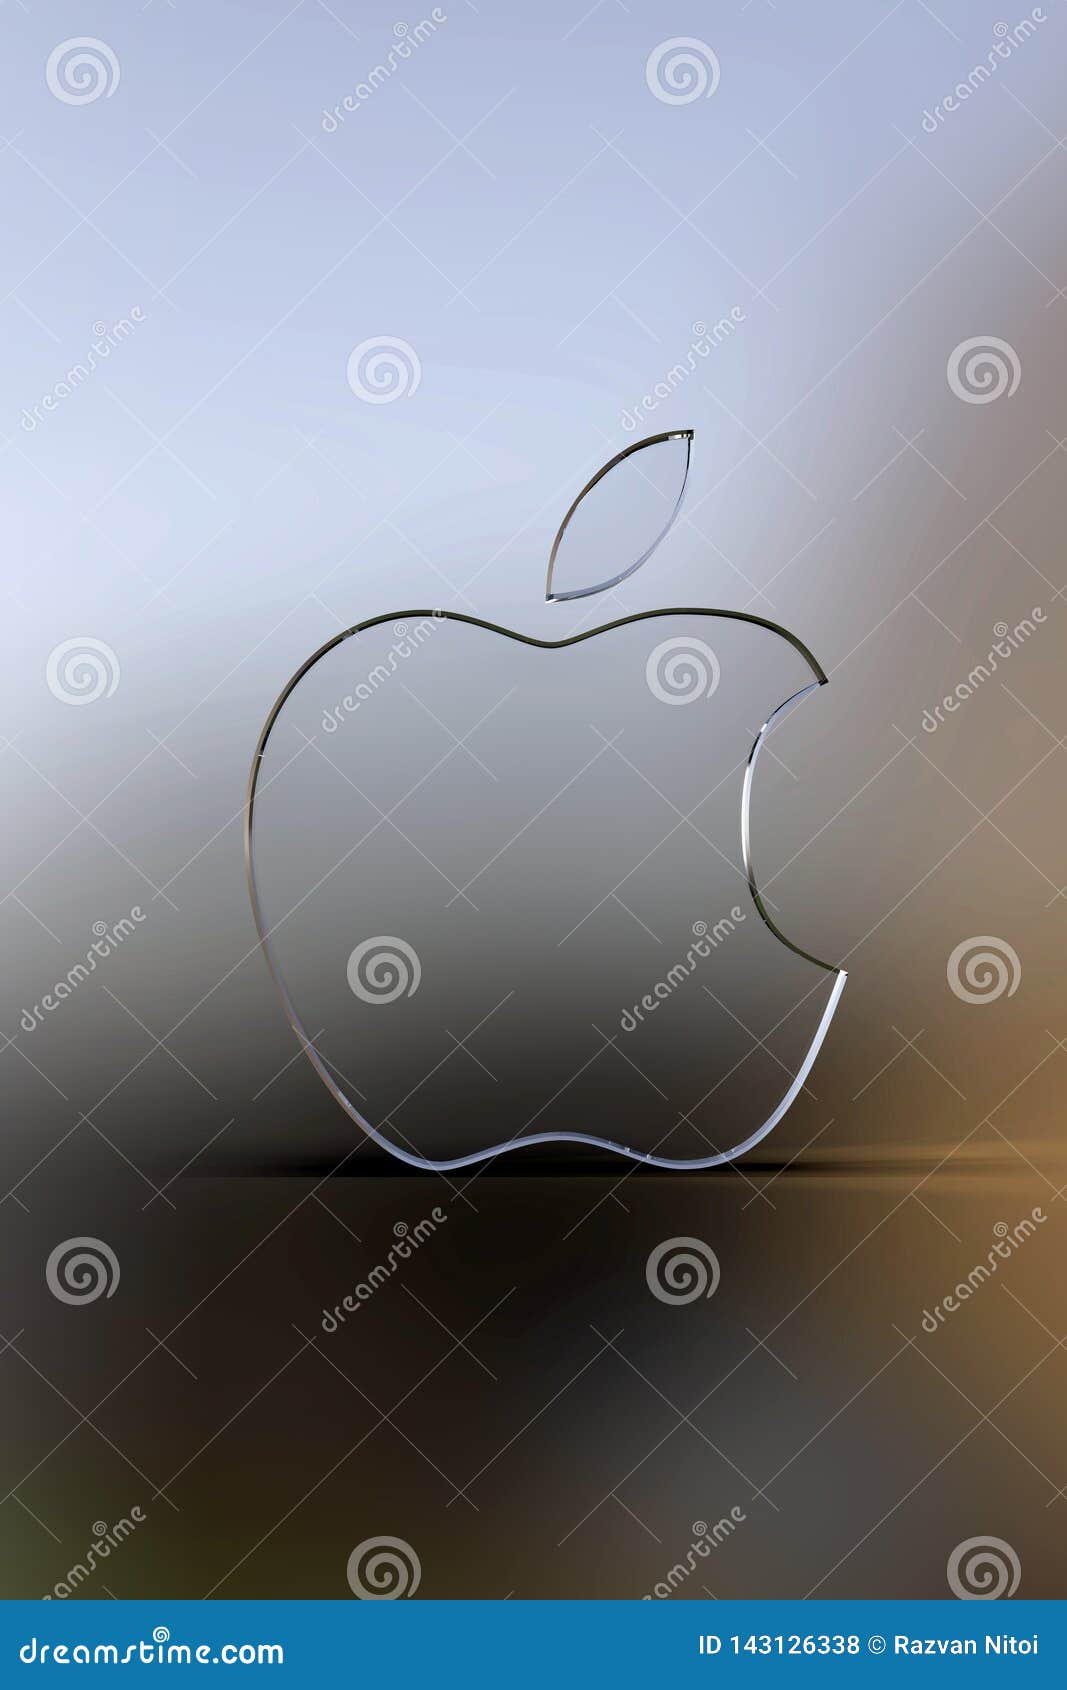 Apple Logo Wallpaper, Blurry Background Editorial Stock Photo -  Illustration of handheld, character: 143126338